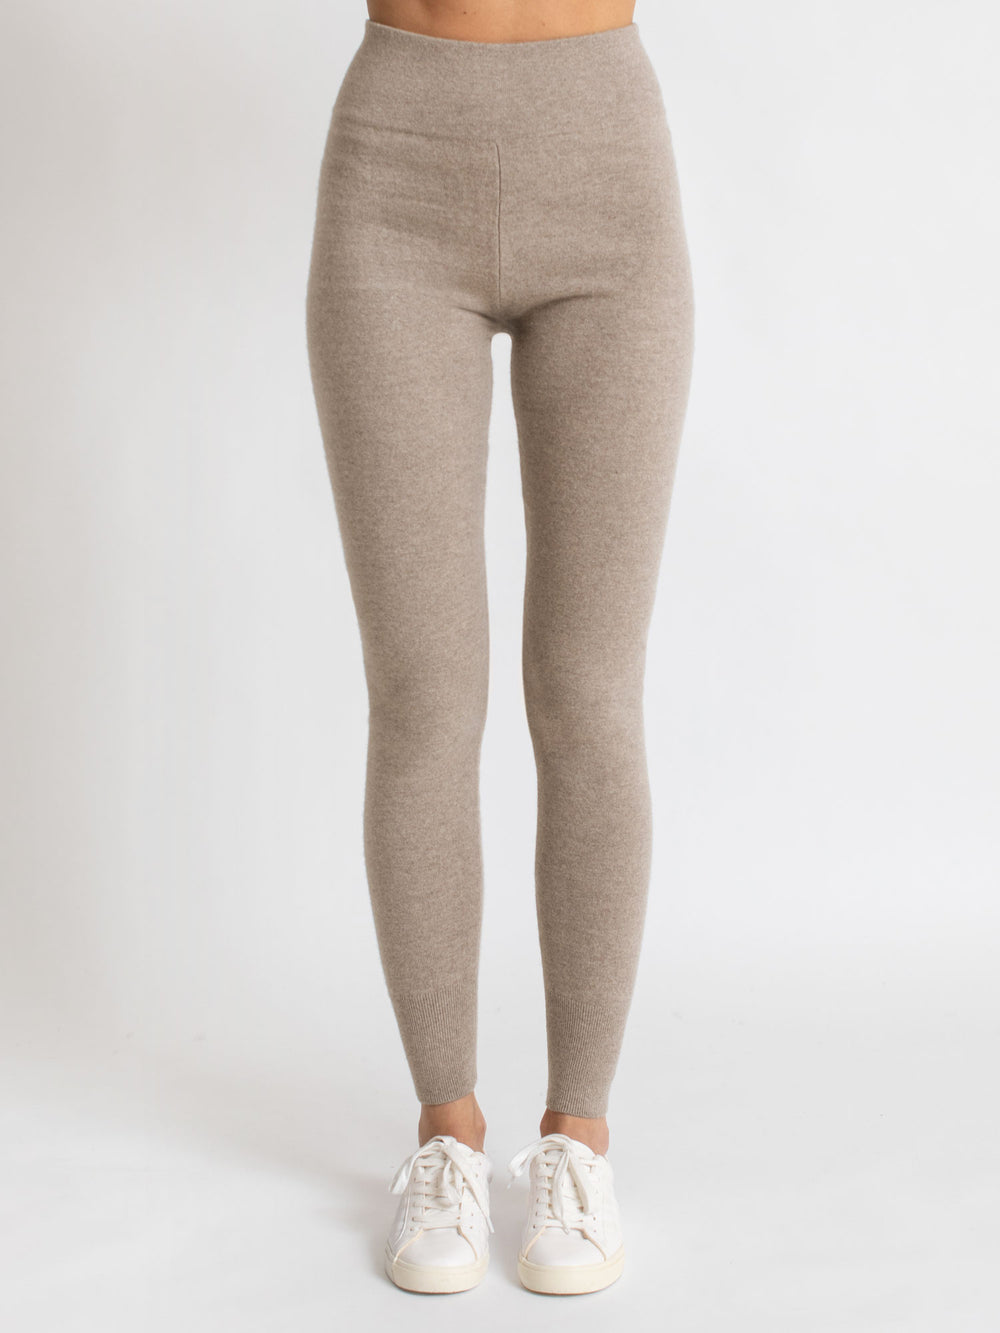 Cashmere pants Tights - light grey